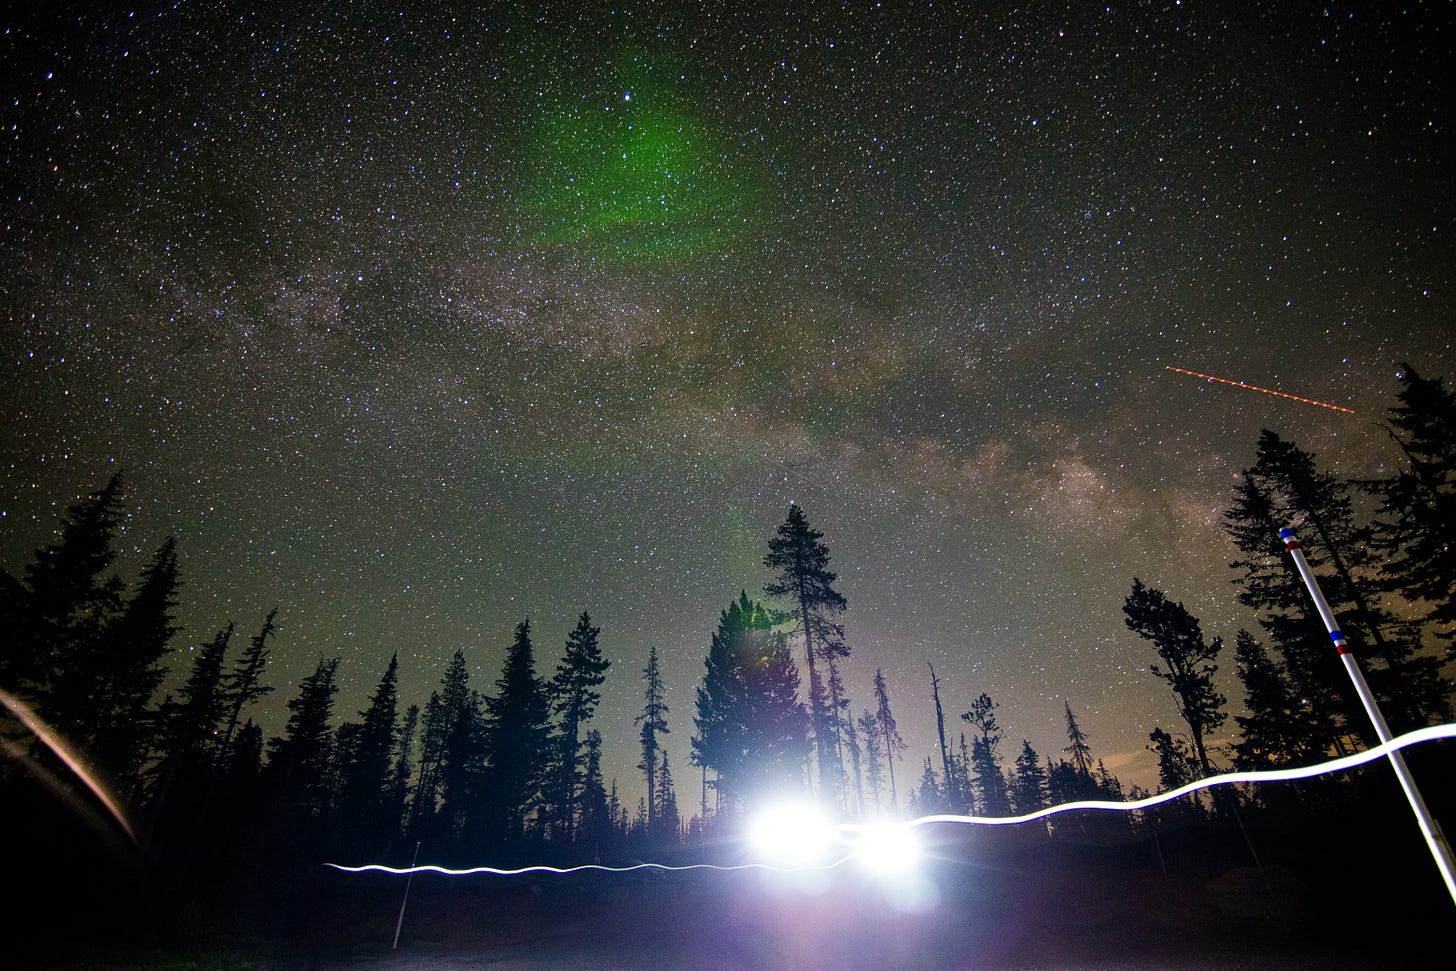 Milky Way sky with a forested foreground, streaks of a light from someone with a headlamp